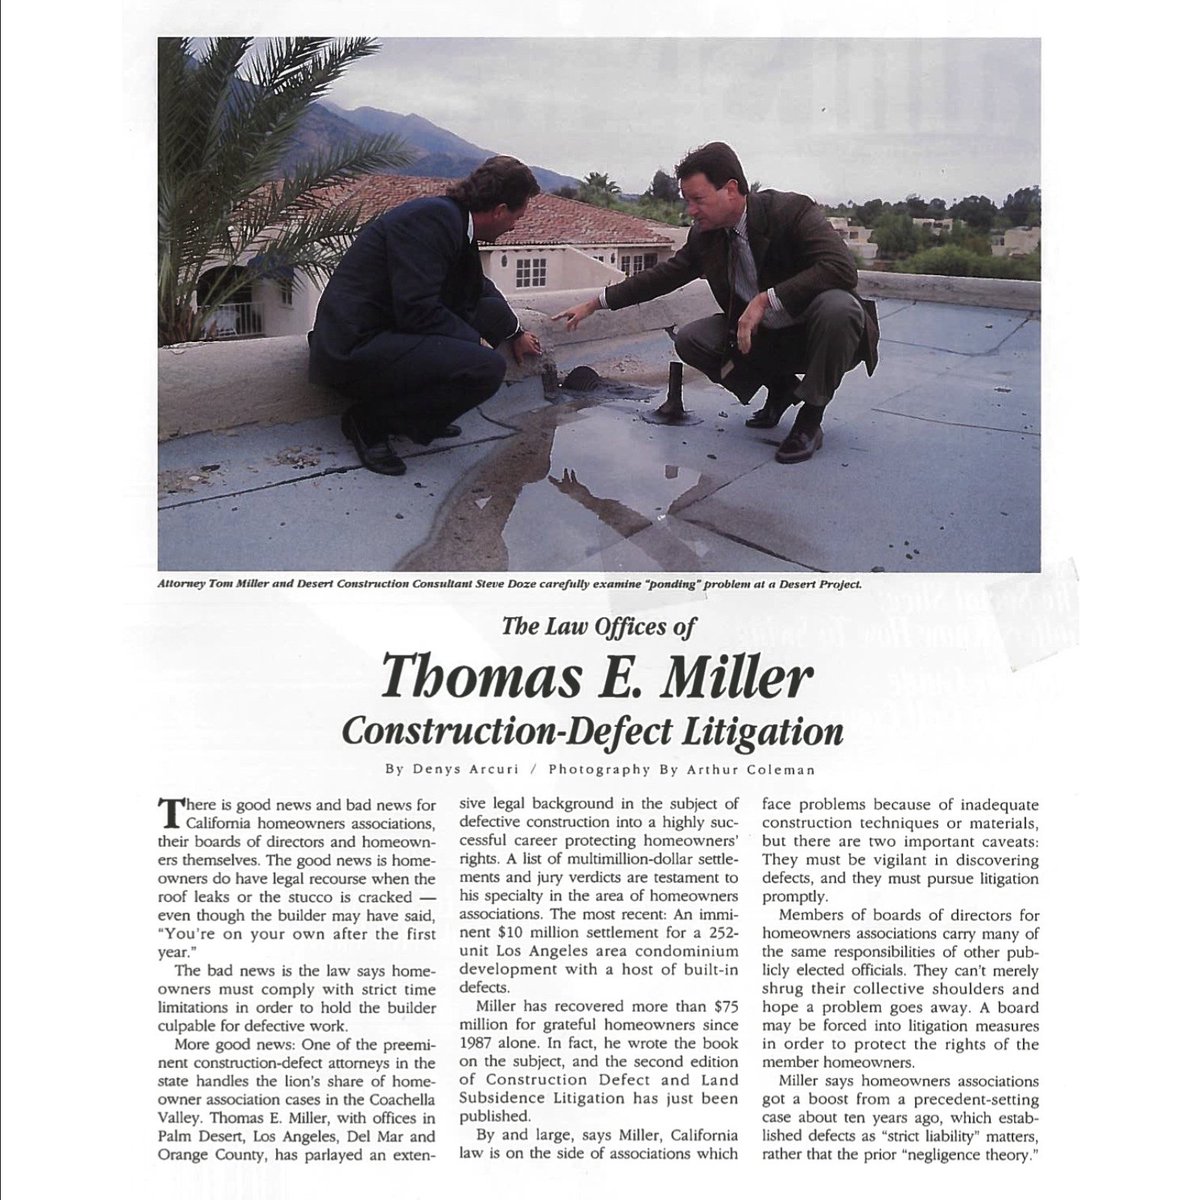 Flashback Friday with Tom Miller

Construction Defect Litigation Experience

constructiondefects.com

#TMLF #constructiondefects #superlawyers #expertise #homeowners #condos #boardmembers #associations #management #california #norcal #socal #bayarea #sanfrancisco #orangecounty